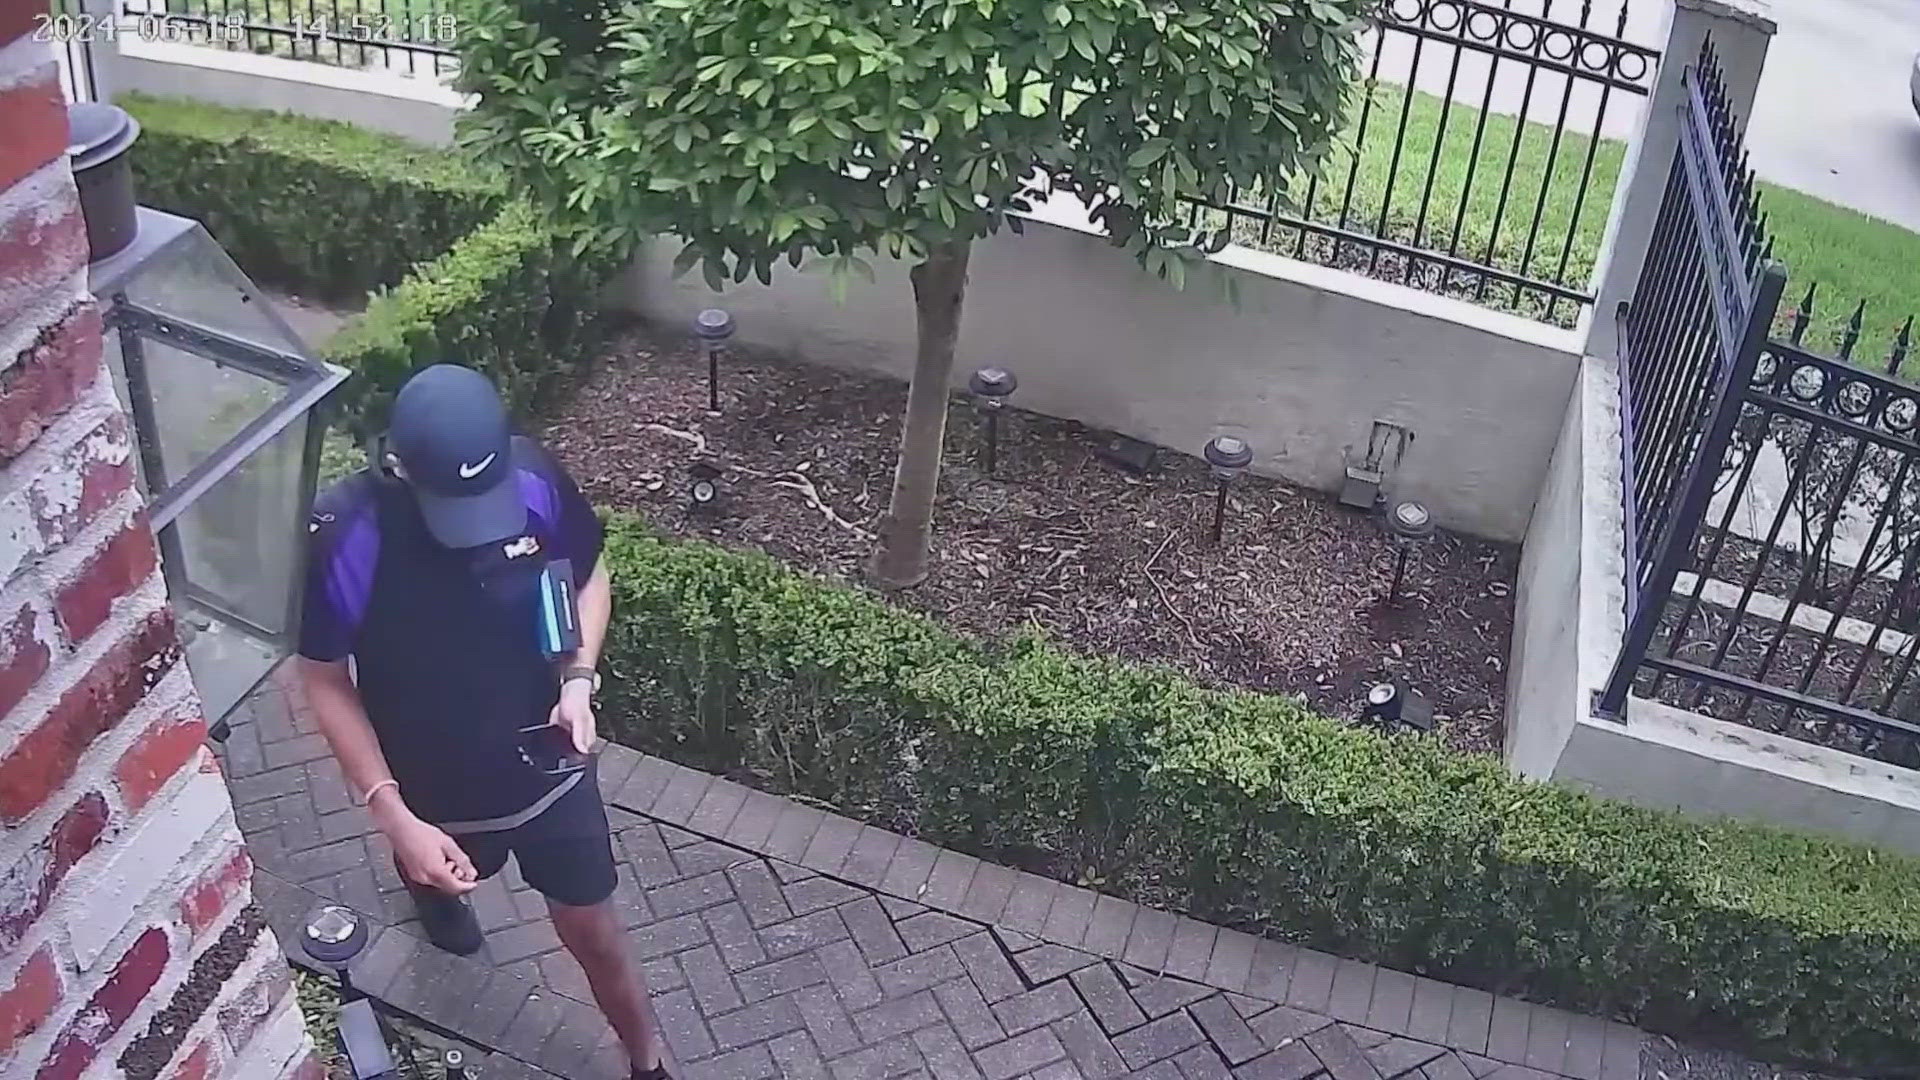 A Texas family says a thief disguised as a FedEx driver stole package containing to new cell phones